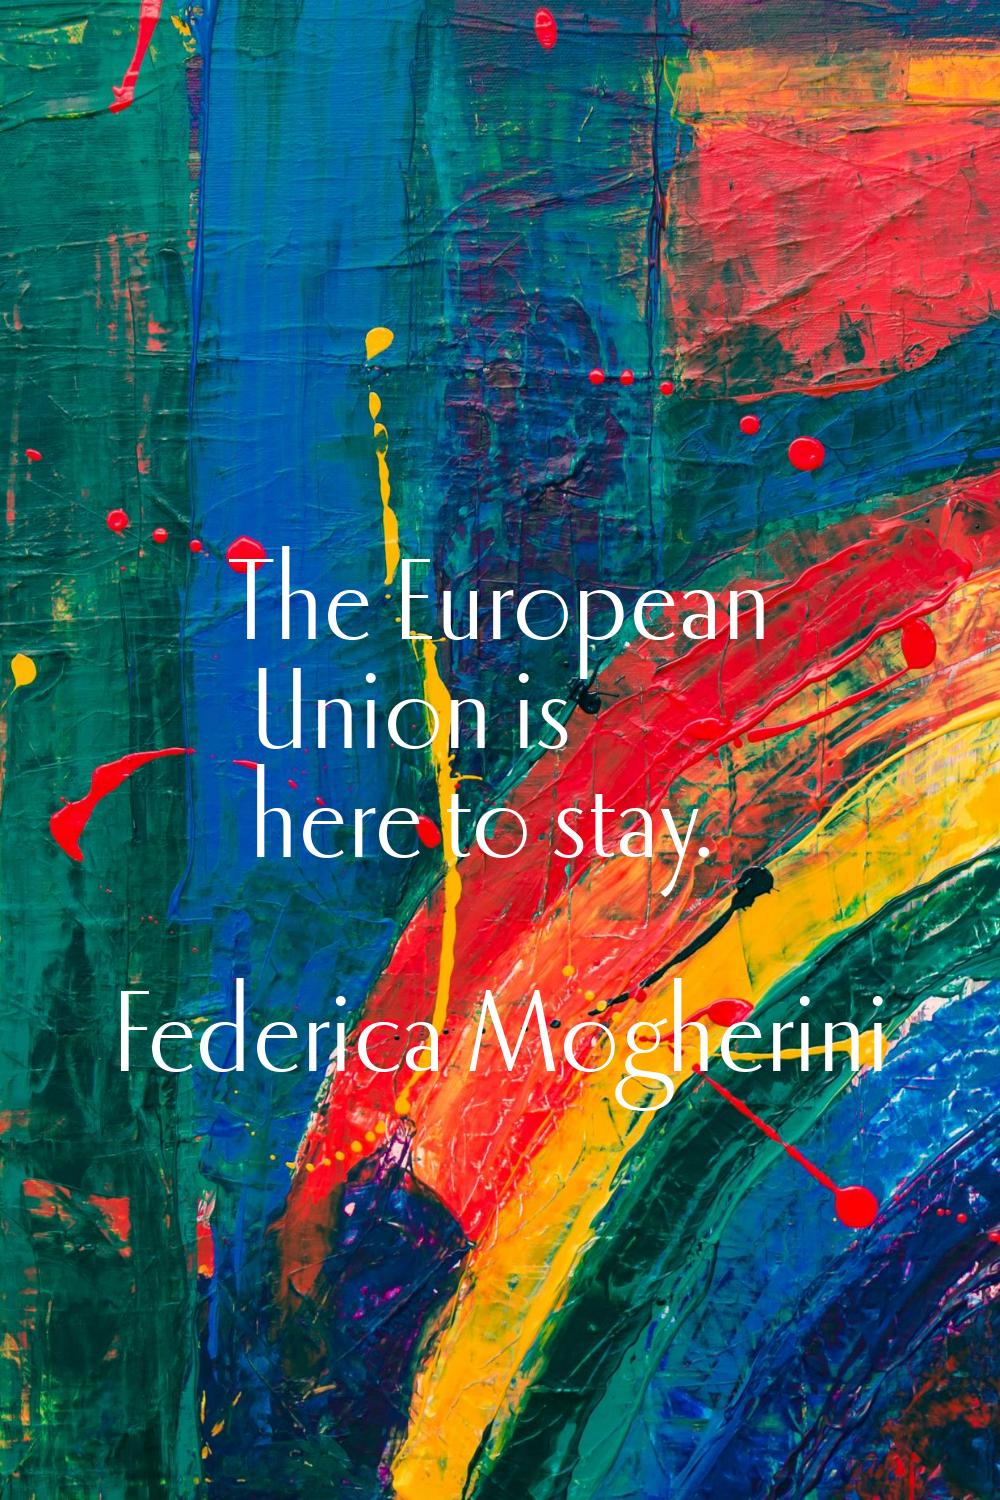 The European Union is here to stay.